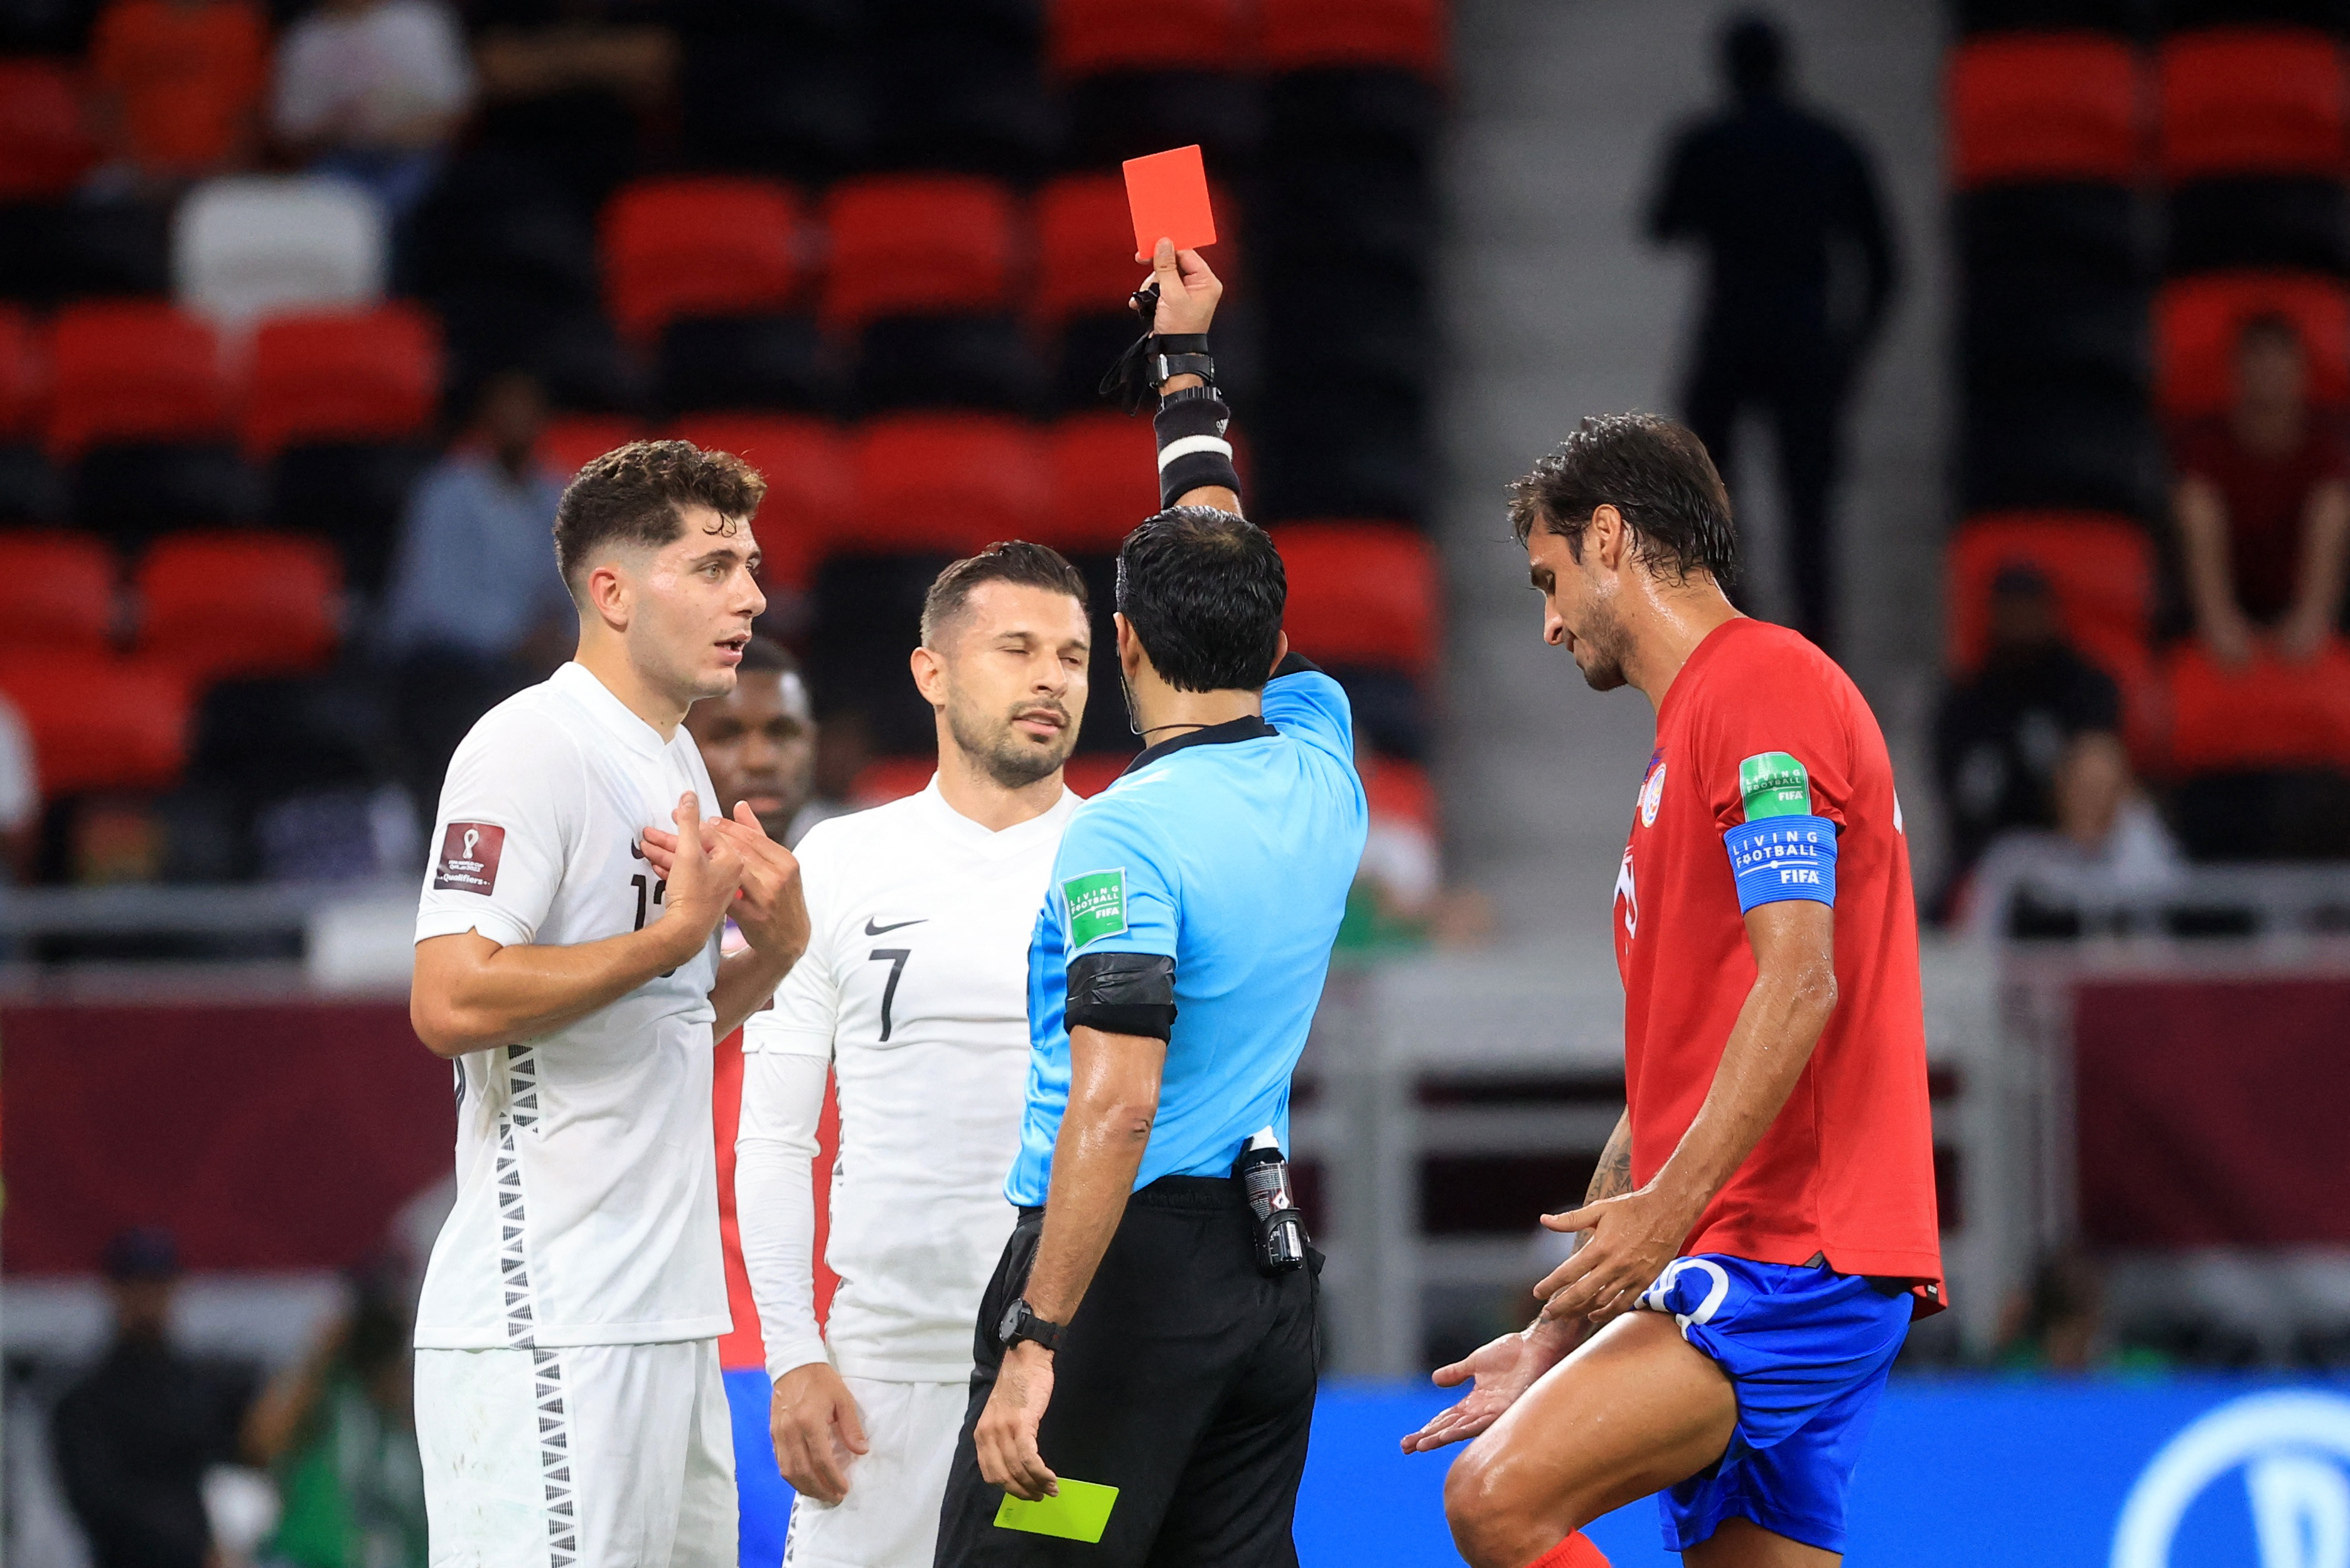 Soccer Football - FIFA World Cup Qualifier - Costa Rica v New Zealand - Al Rayyan Stadium, Al Rayyan, Qatar - June 14, 2022 New Zealand's Kosta Barbarouses is shown a red card by referee Abdulla Hassan Mohammed REUTERS/Mohammed Dabbous